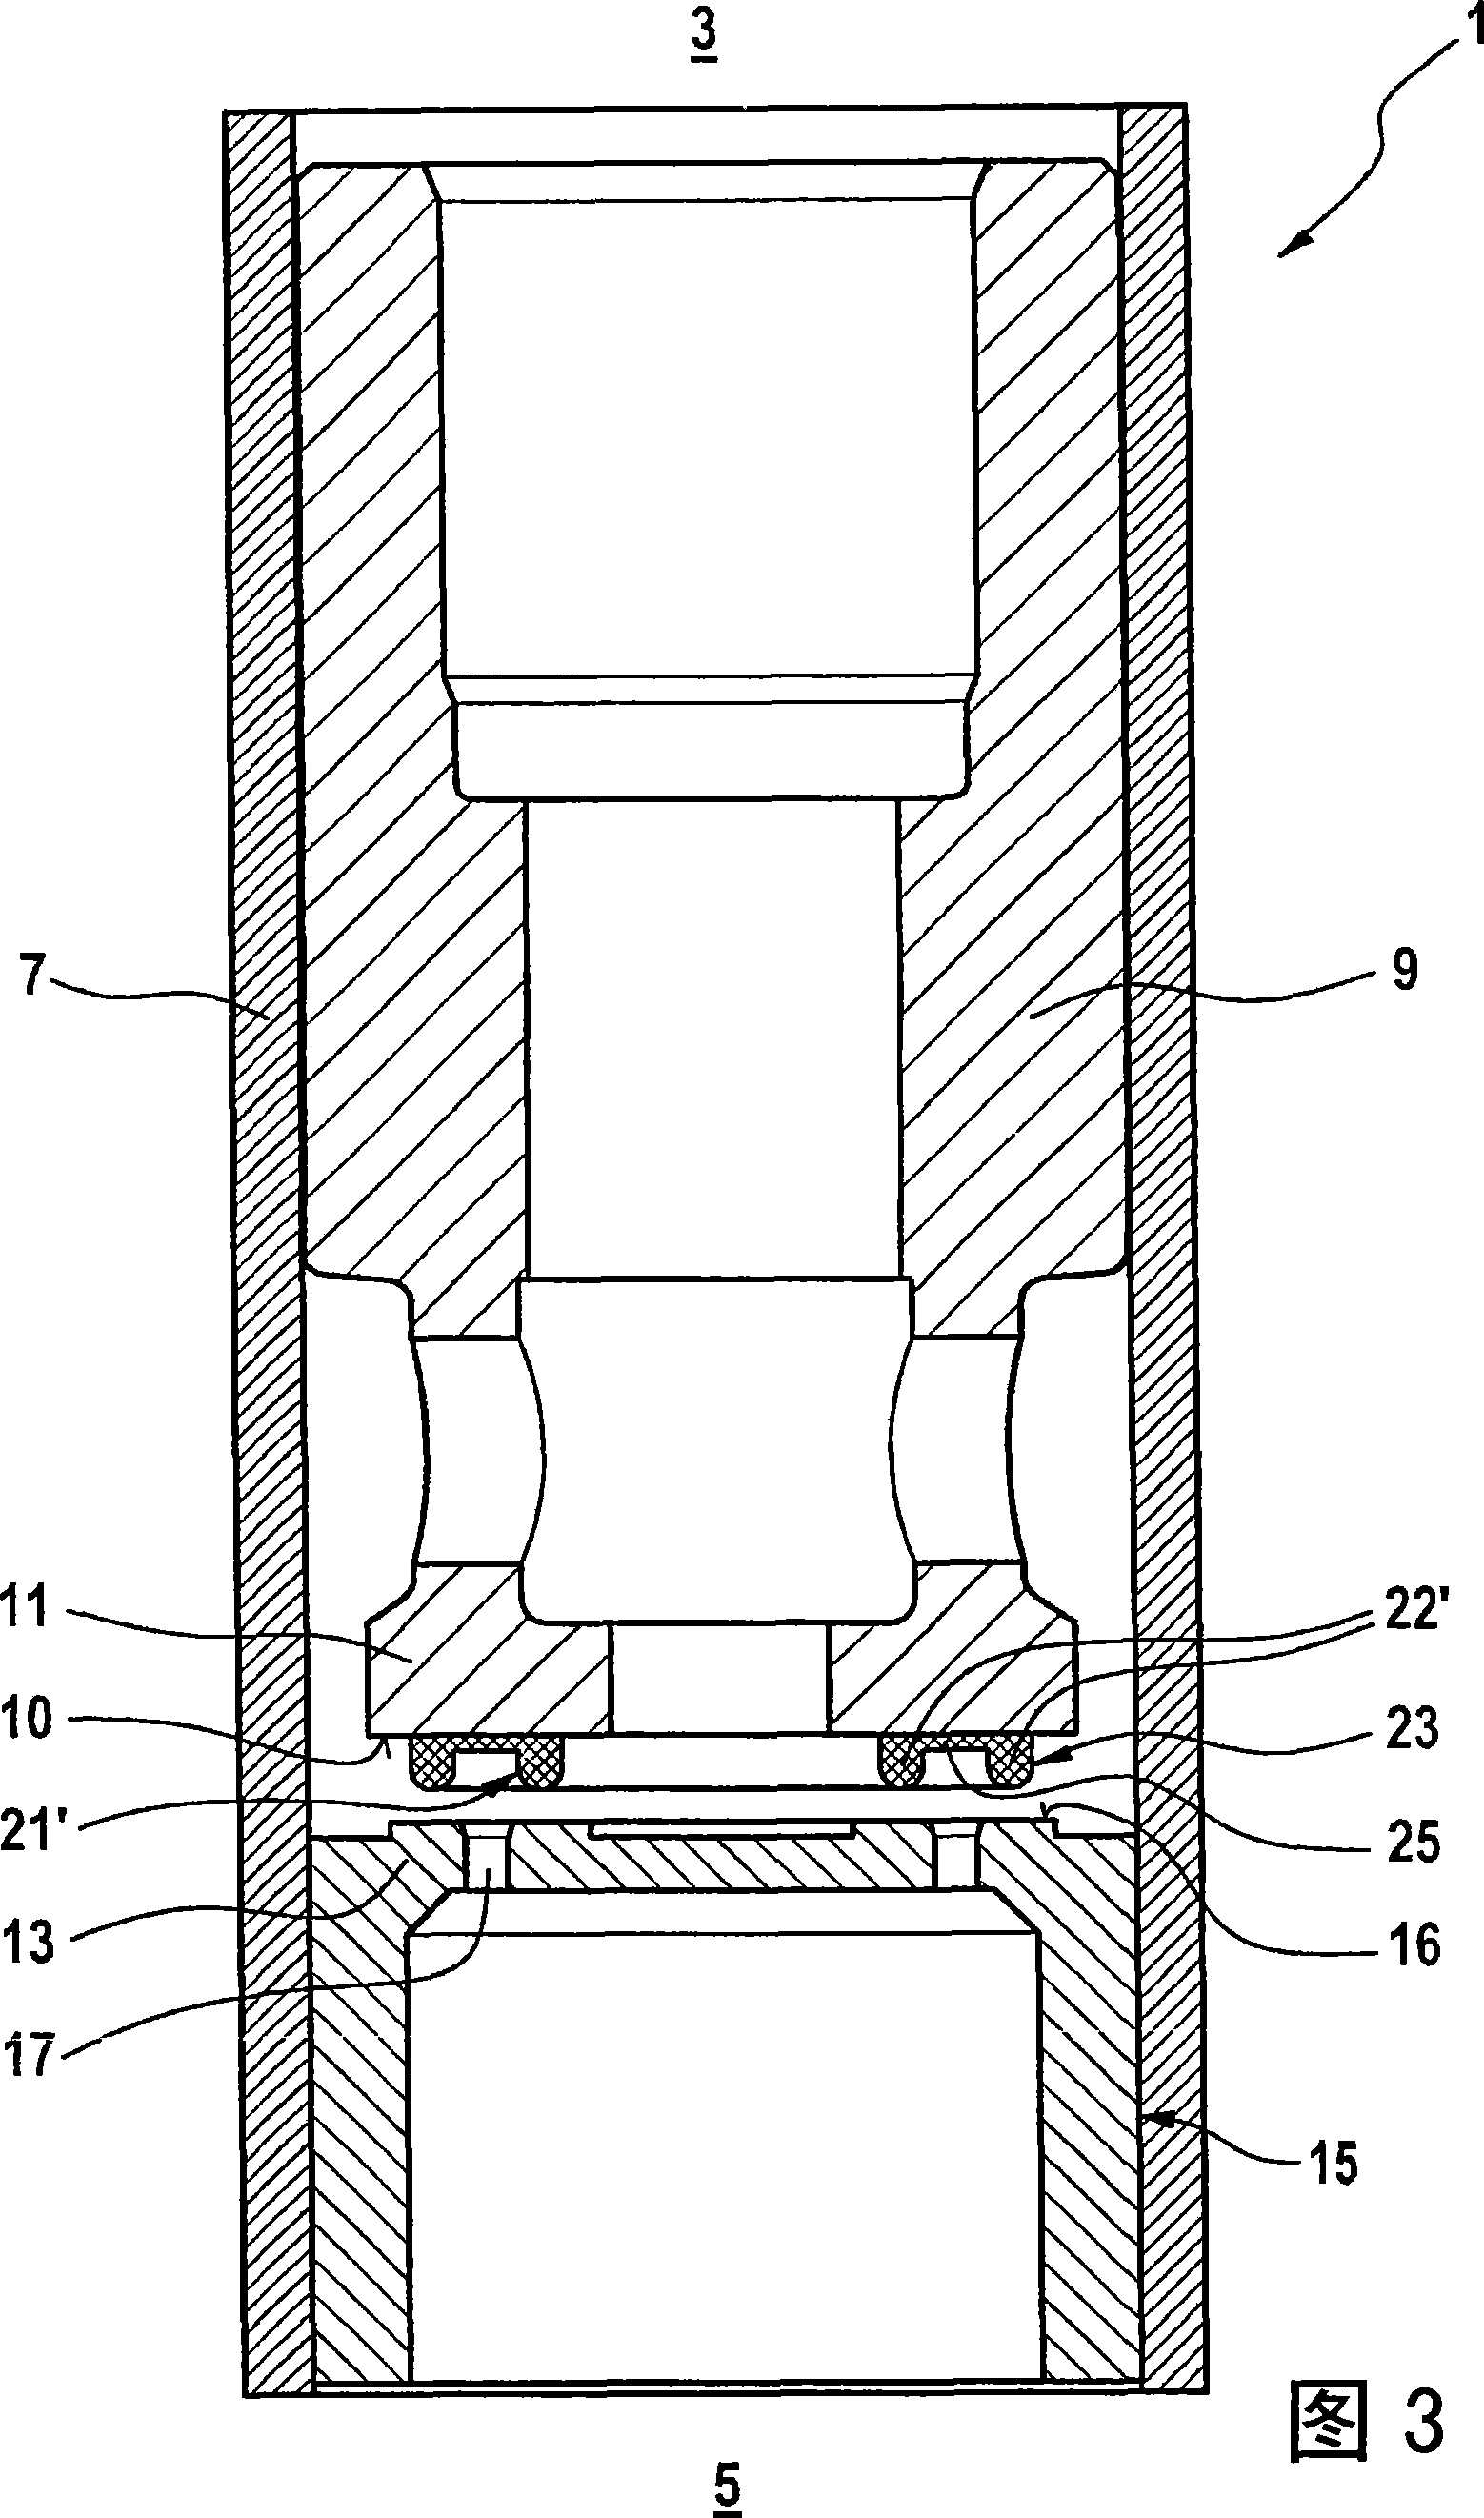 Valve module for supplying in particular gaseous media